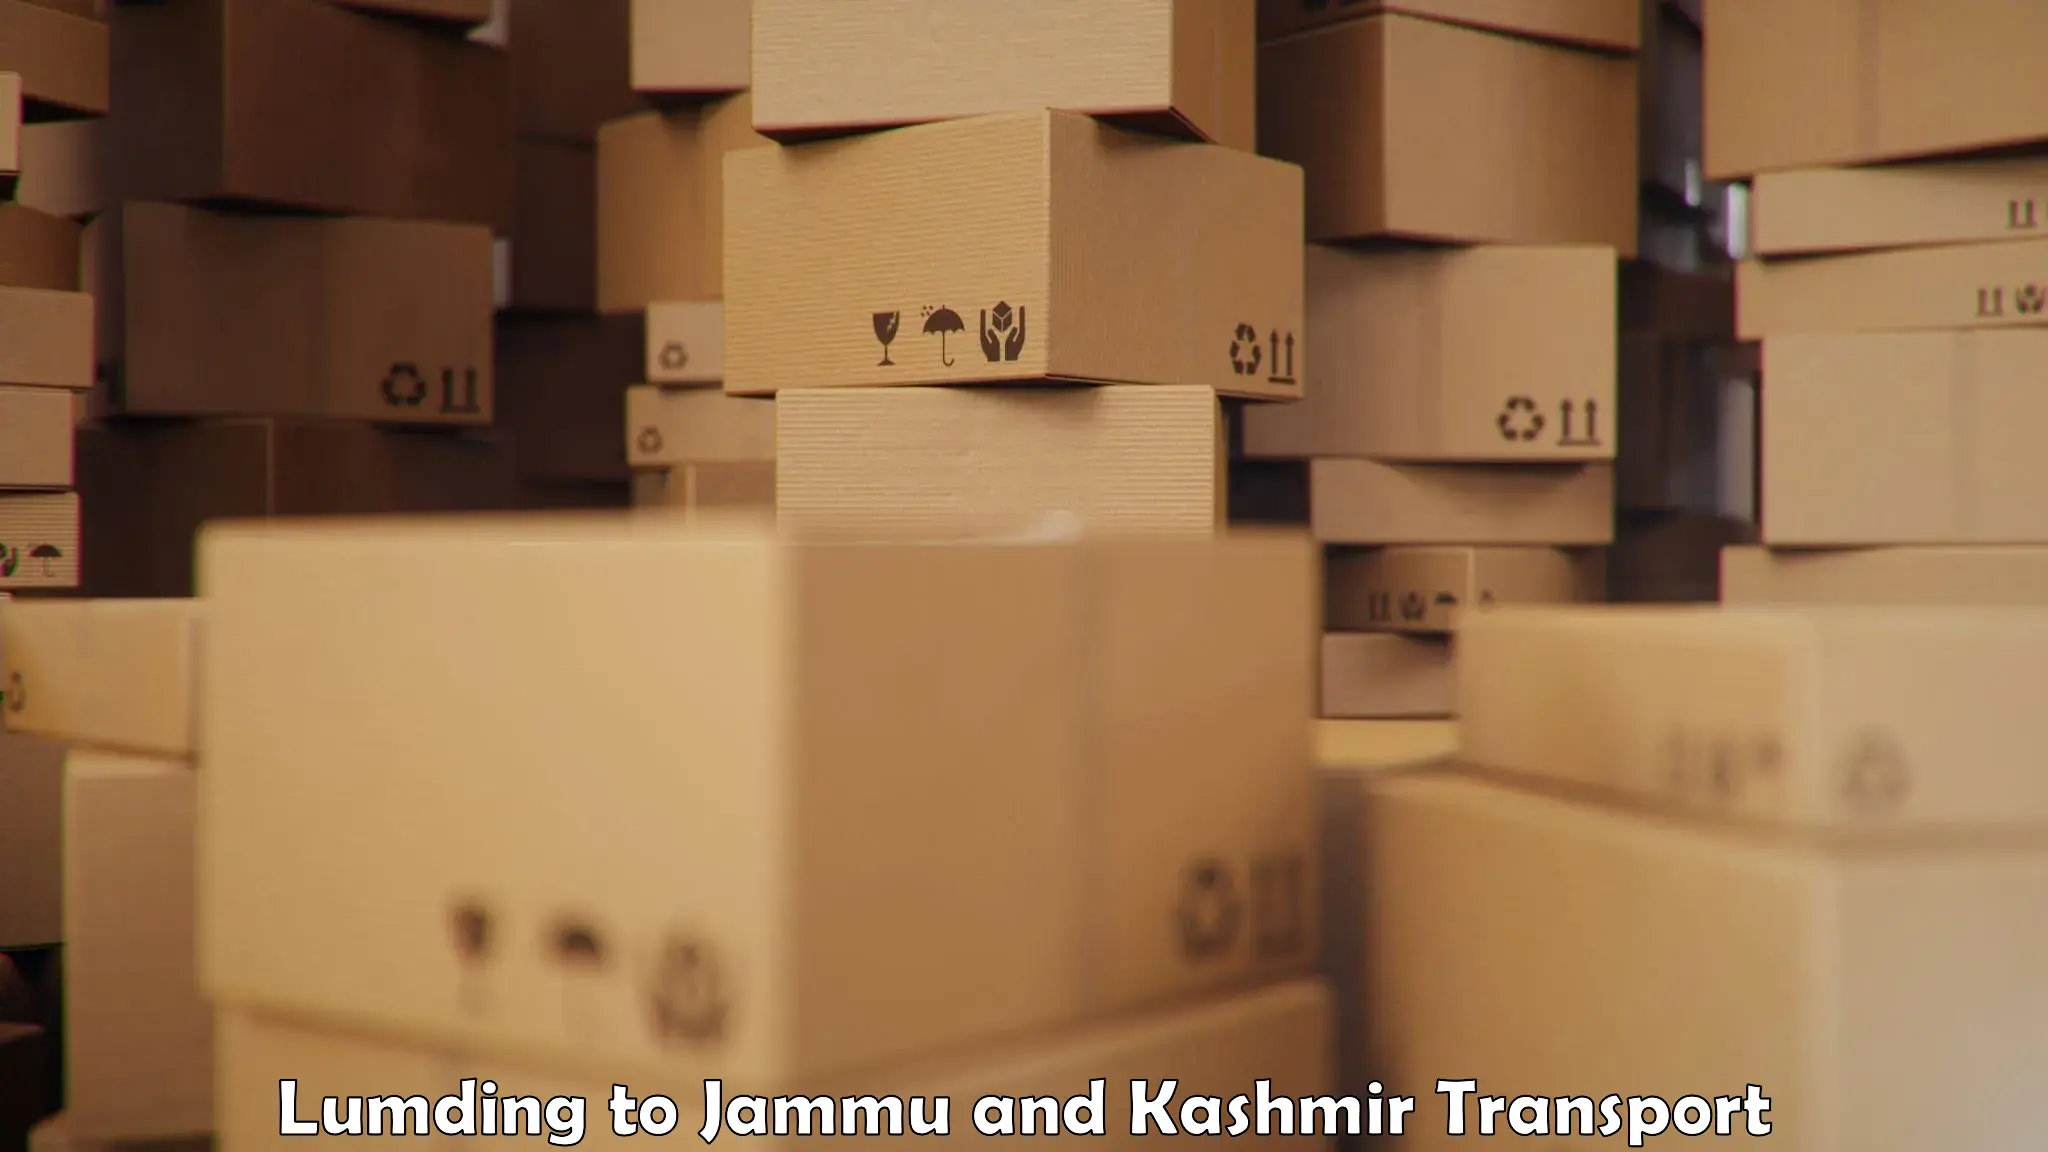 Goods delivery service Lumding to Baramulla